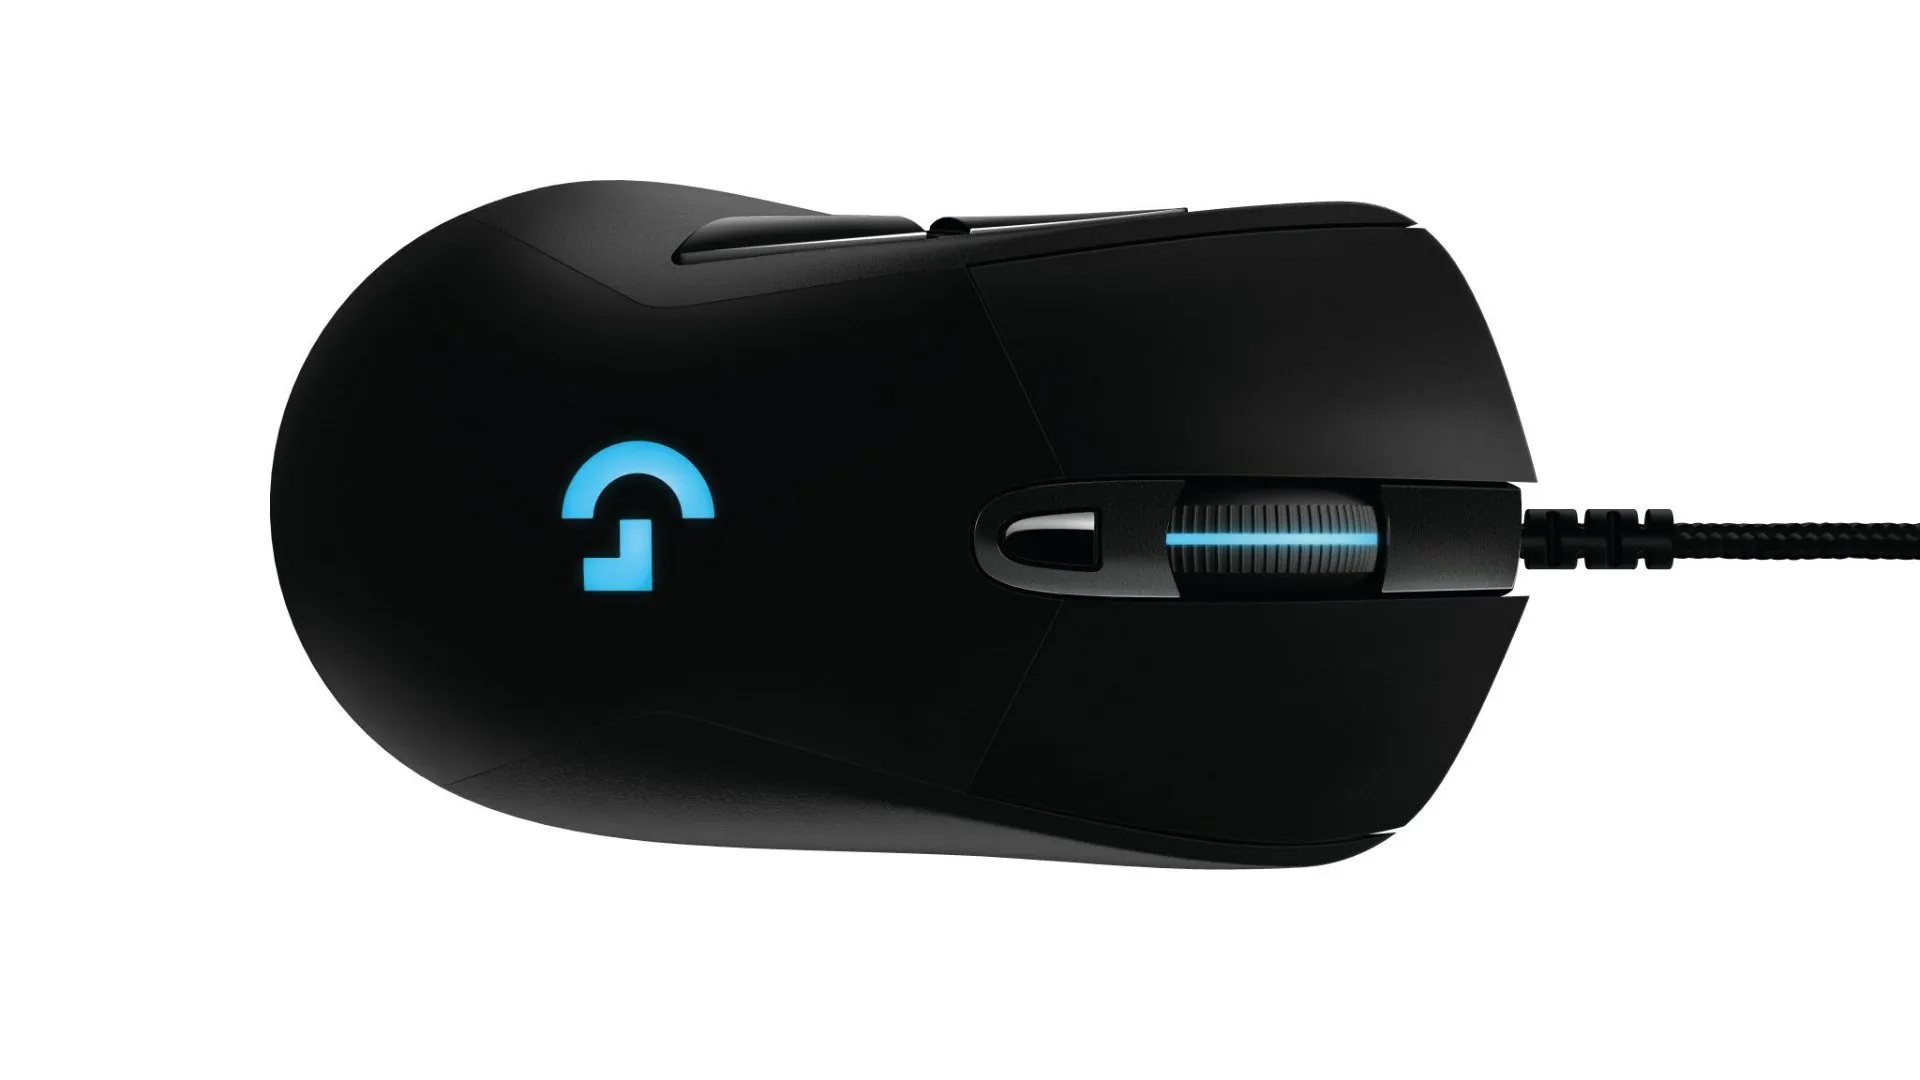 Review: G403 Prodigy Gaming Mouse (Wired and Wireless) – Destructoid